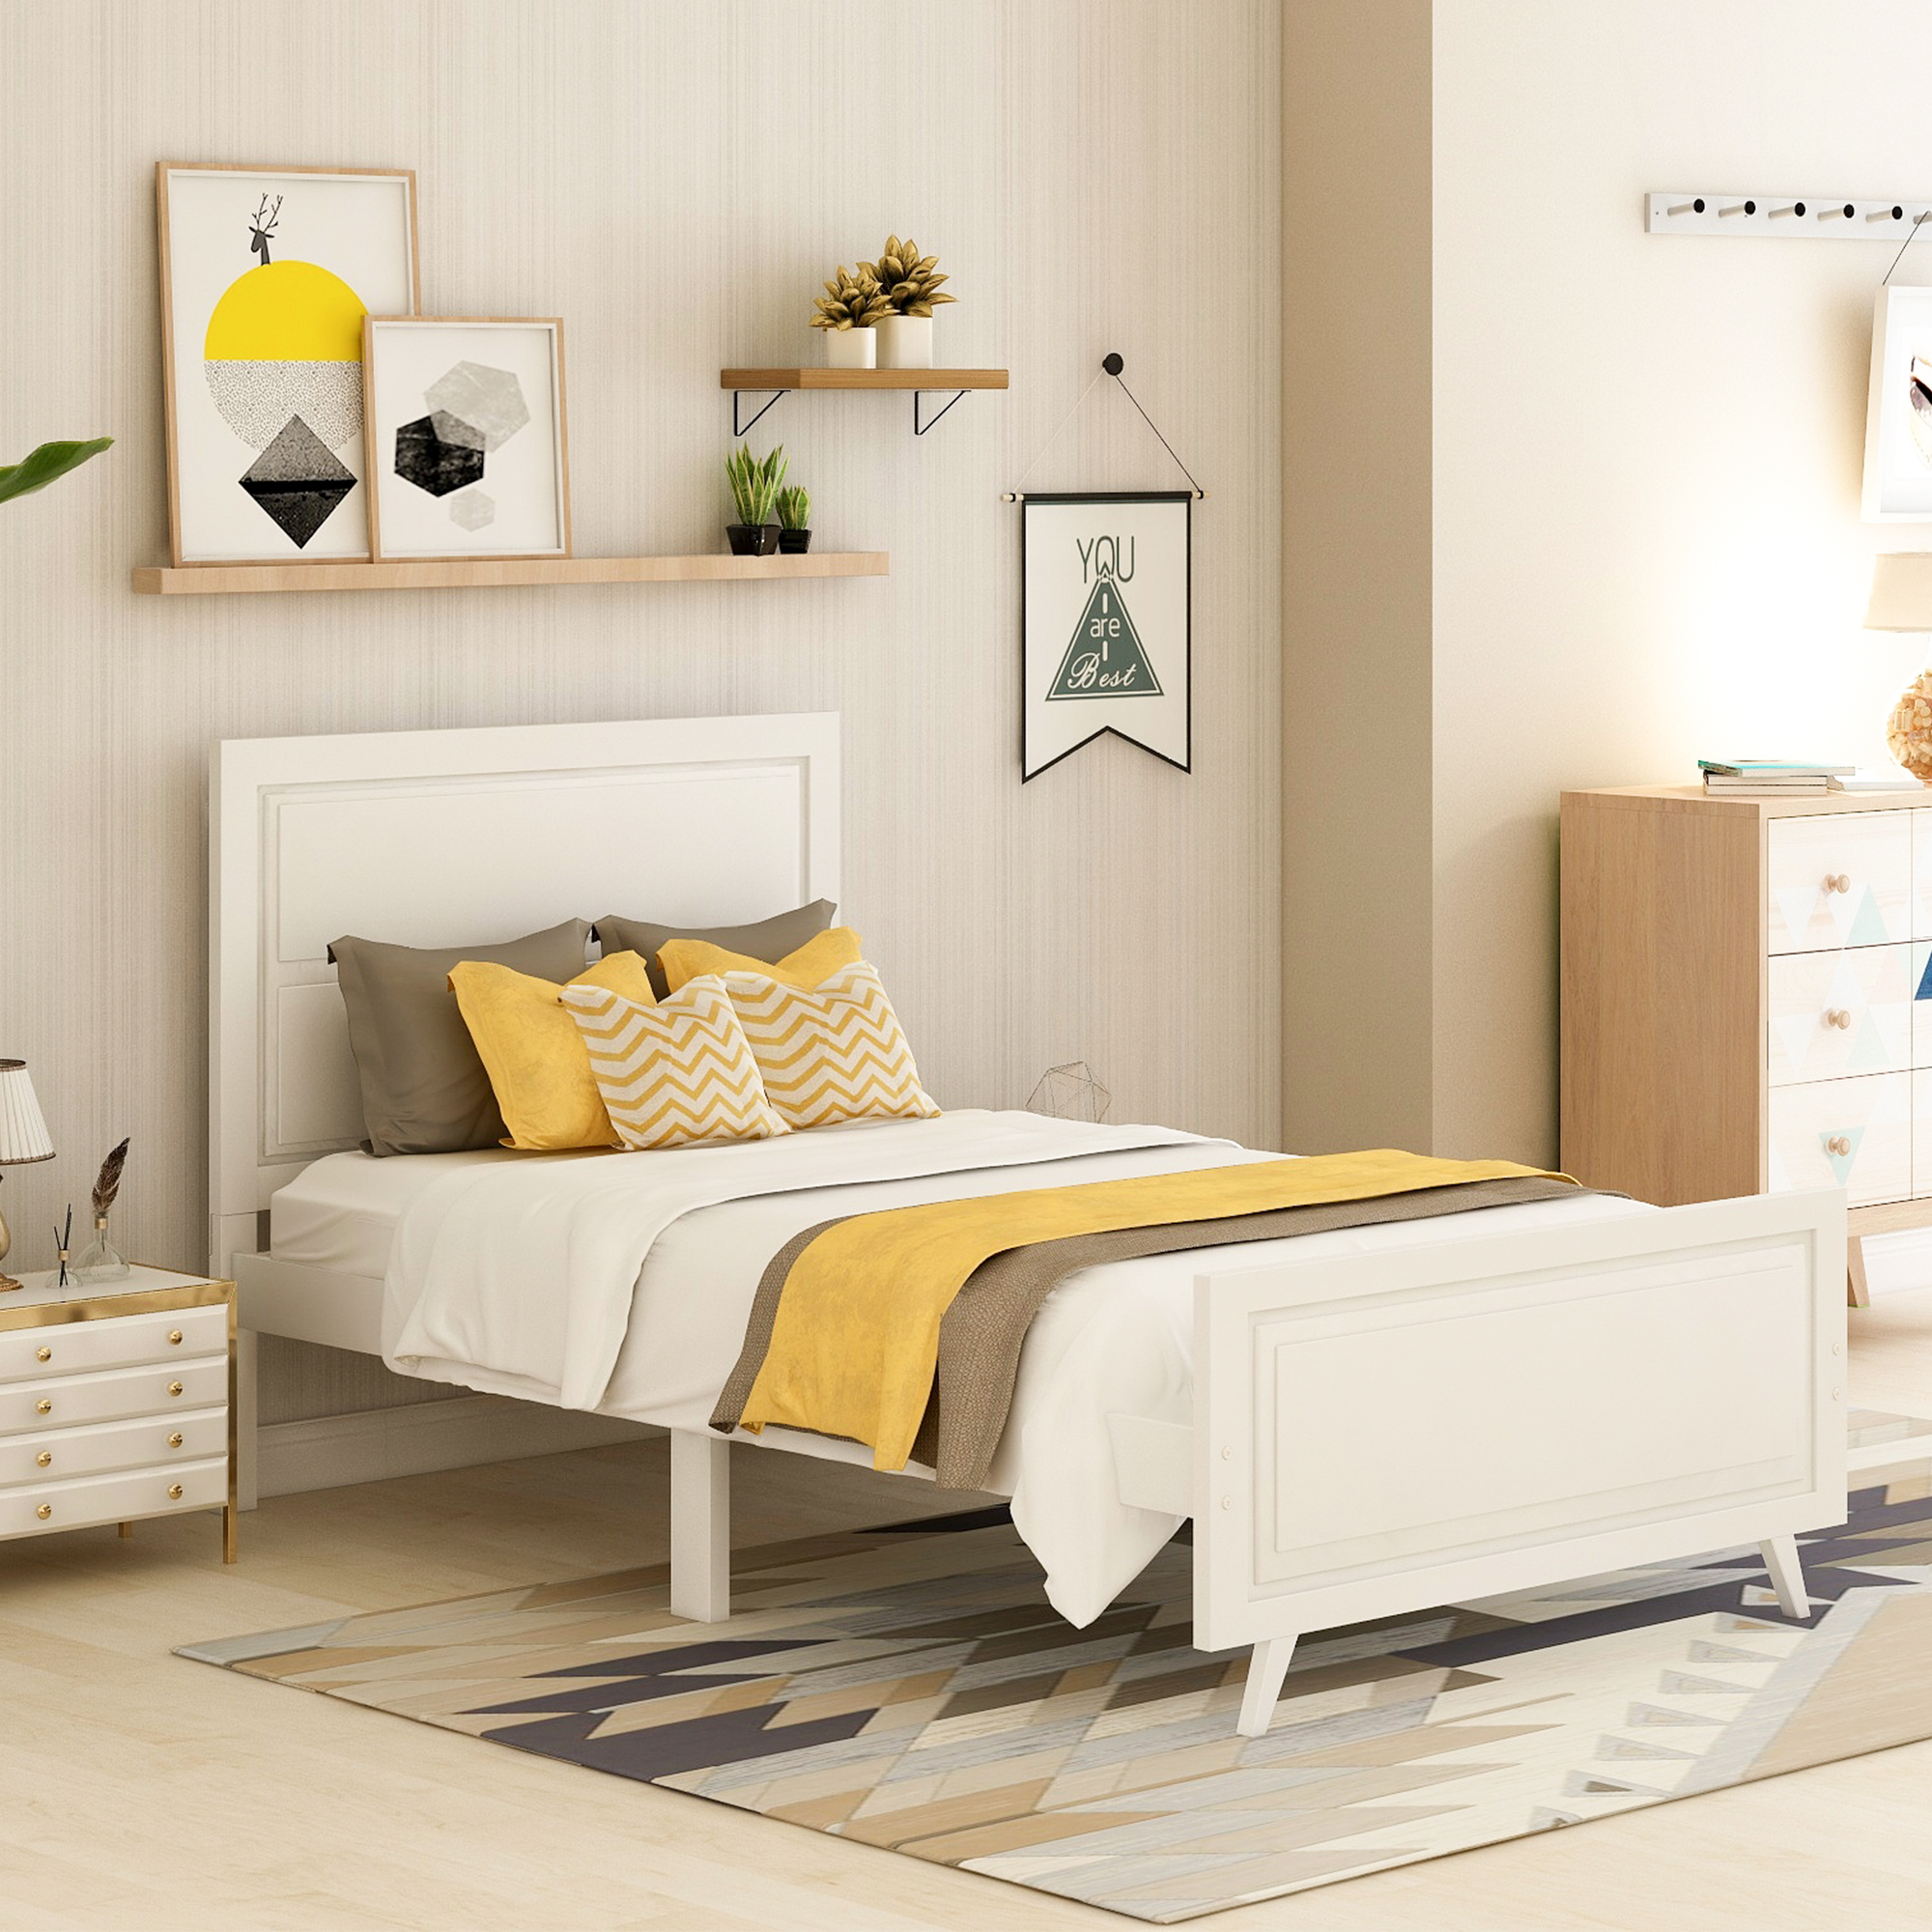 Twin Bed Frame with Headboard, Wood Single Bed Frame Wood Platform Bed, Twin Single Bed Frame w/ Wood Slat, Twin Platform Bed Frame for Kids, Platform Twin Bed Frame No Box Spring Needed, White, R108 - image 1 of 6